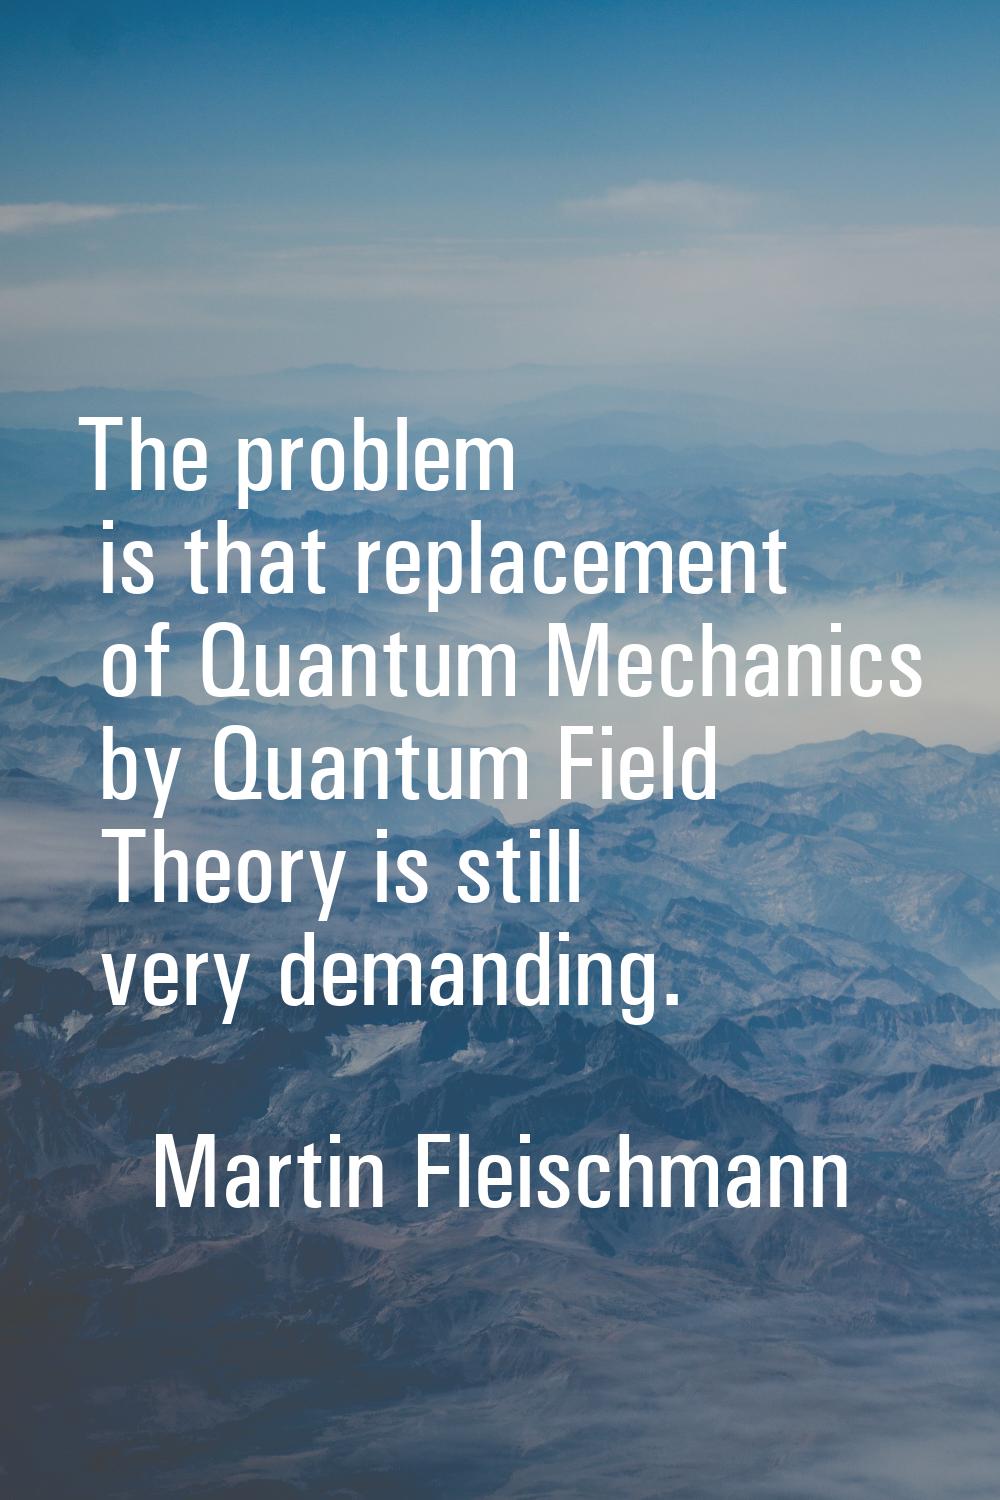 The problem is that replacement of Quantum Mechanics by Quantum Field Theory is still very demandin